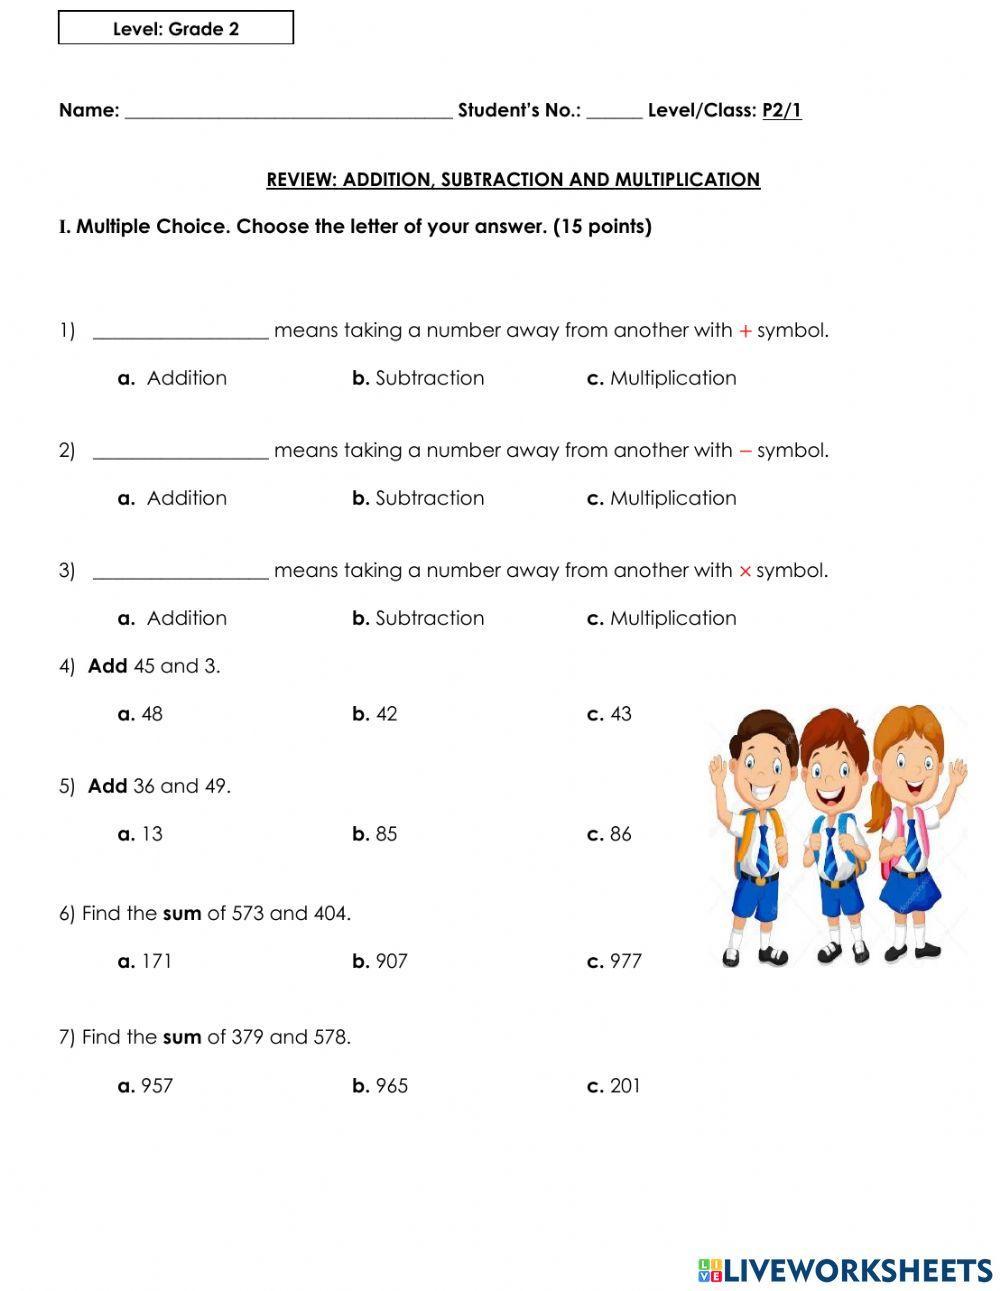 Review: Addition, subtraction and multiplication